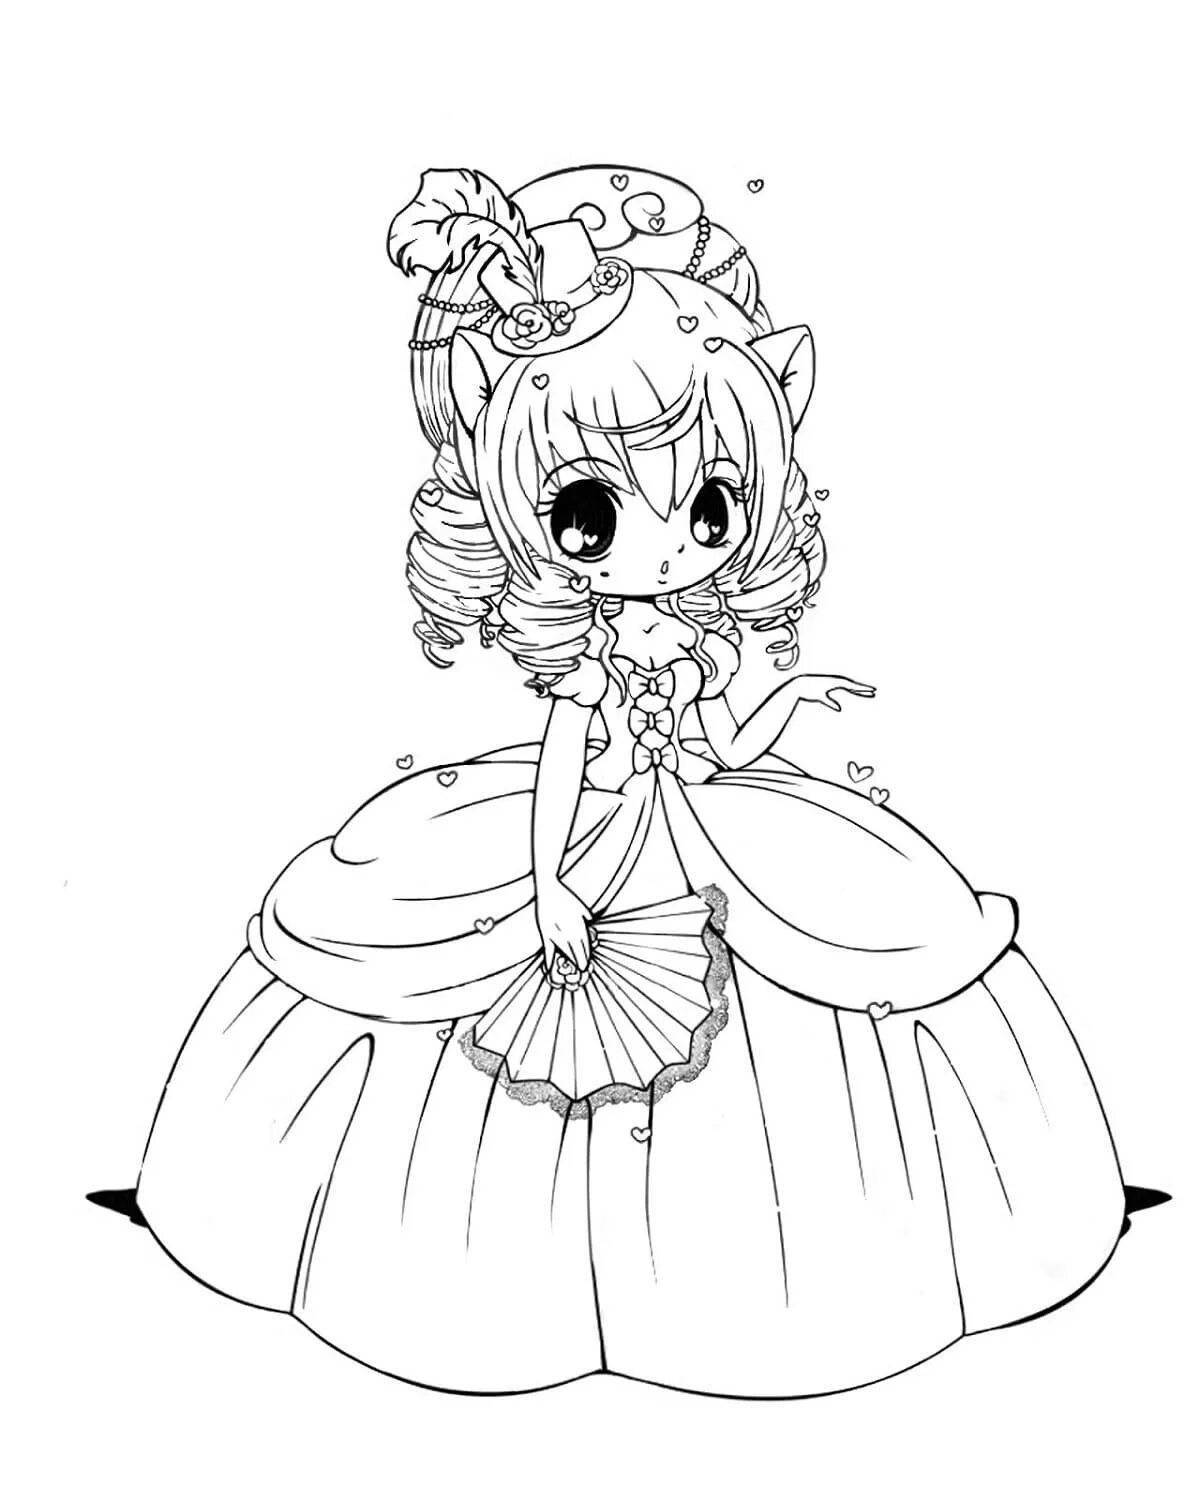 Coloring book magical anime doll